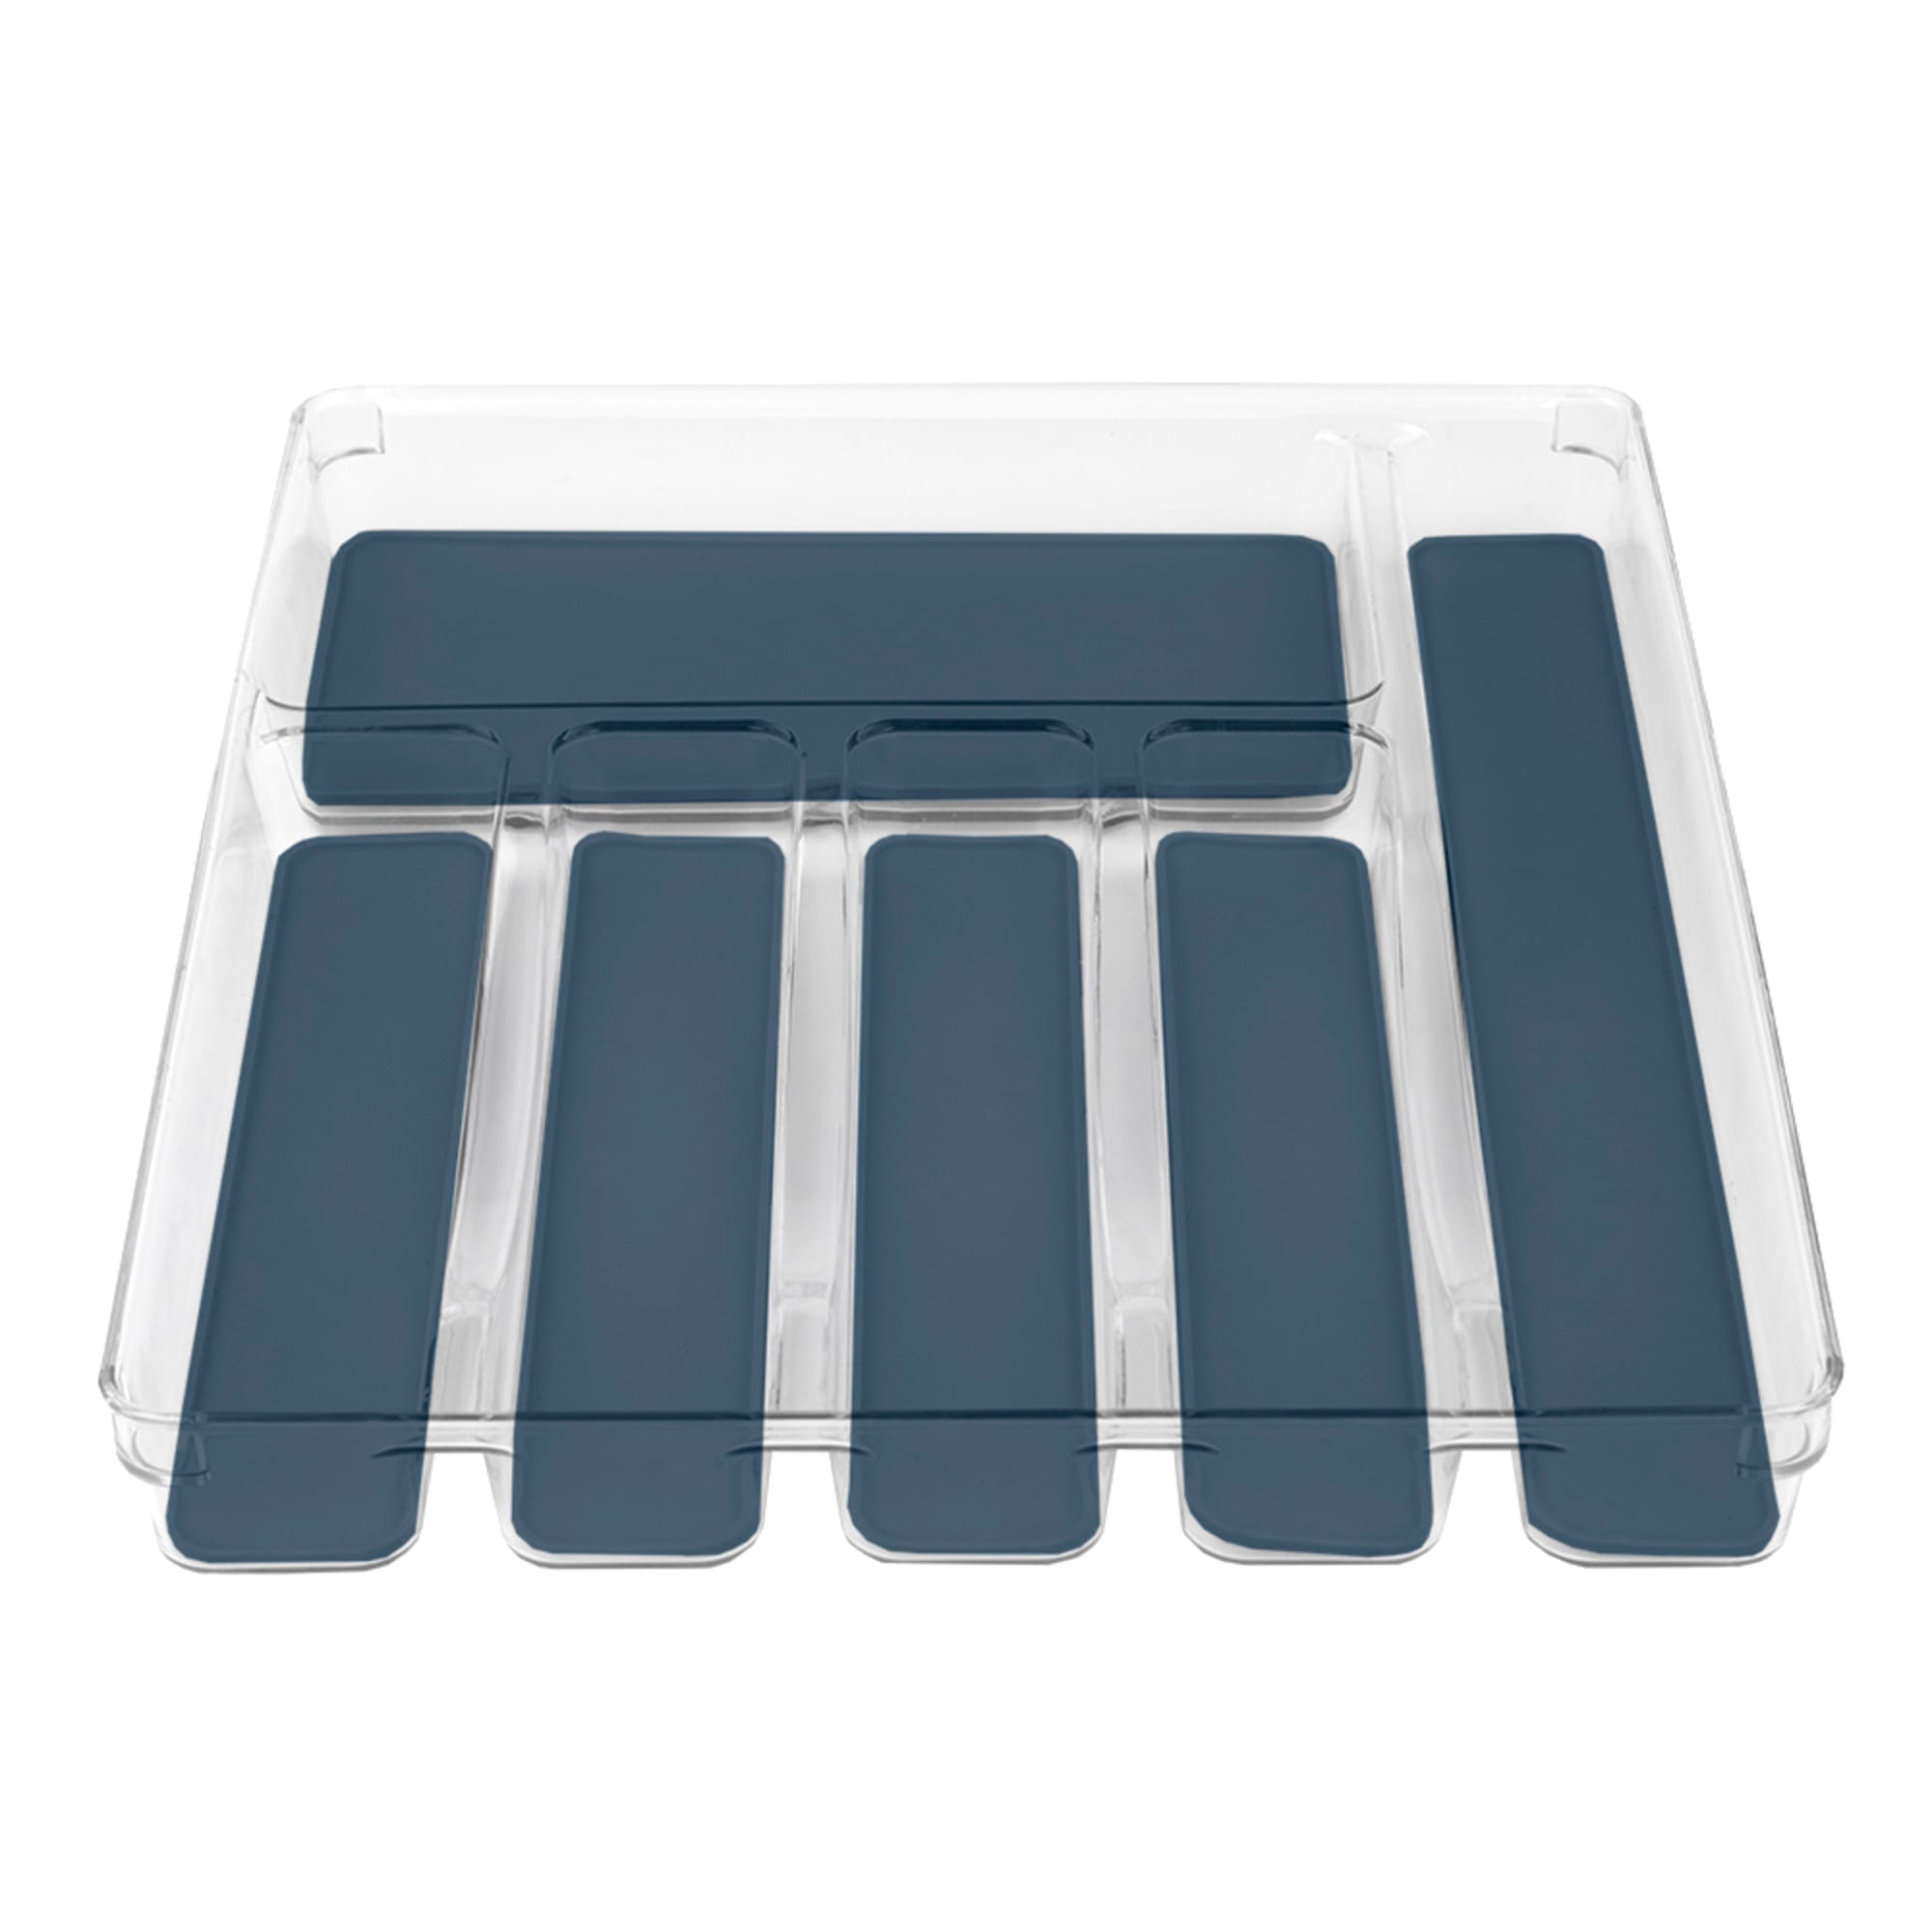 Michael Graves Design Large 6  Compartment Rubber Lined Plastic Cutlery Tray, Indigo $10.00 EACH, CASE PACK OF 12